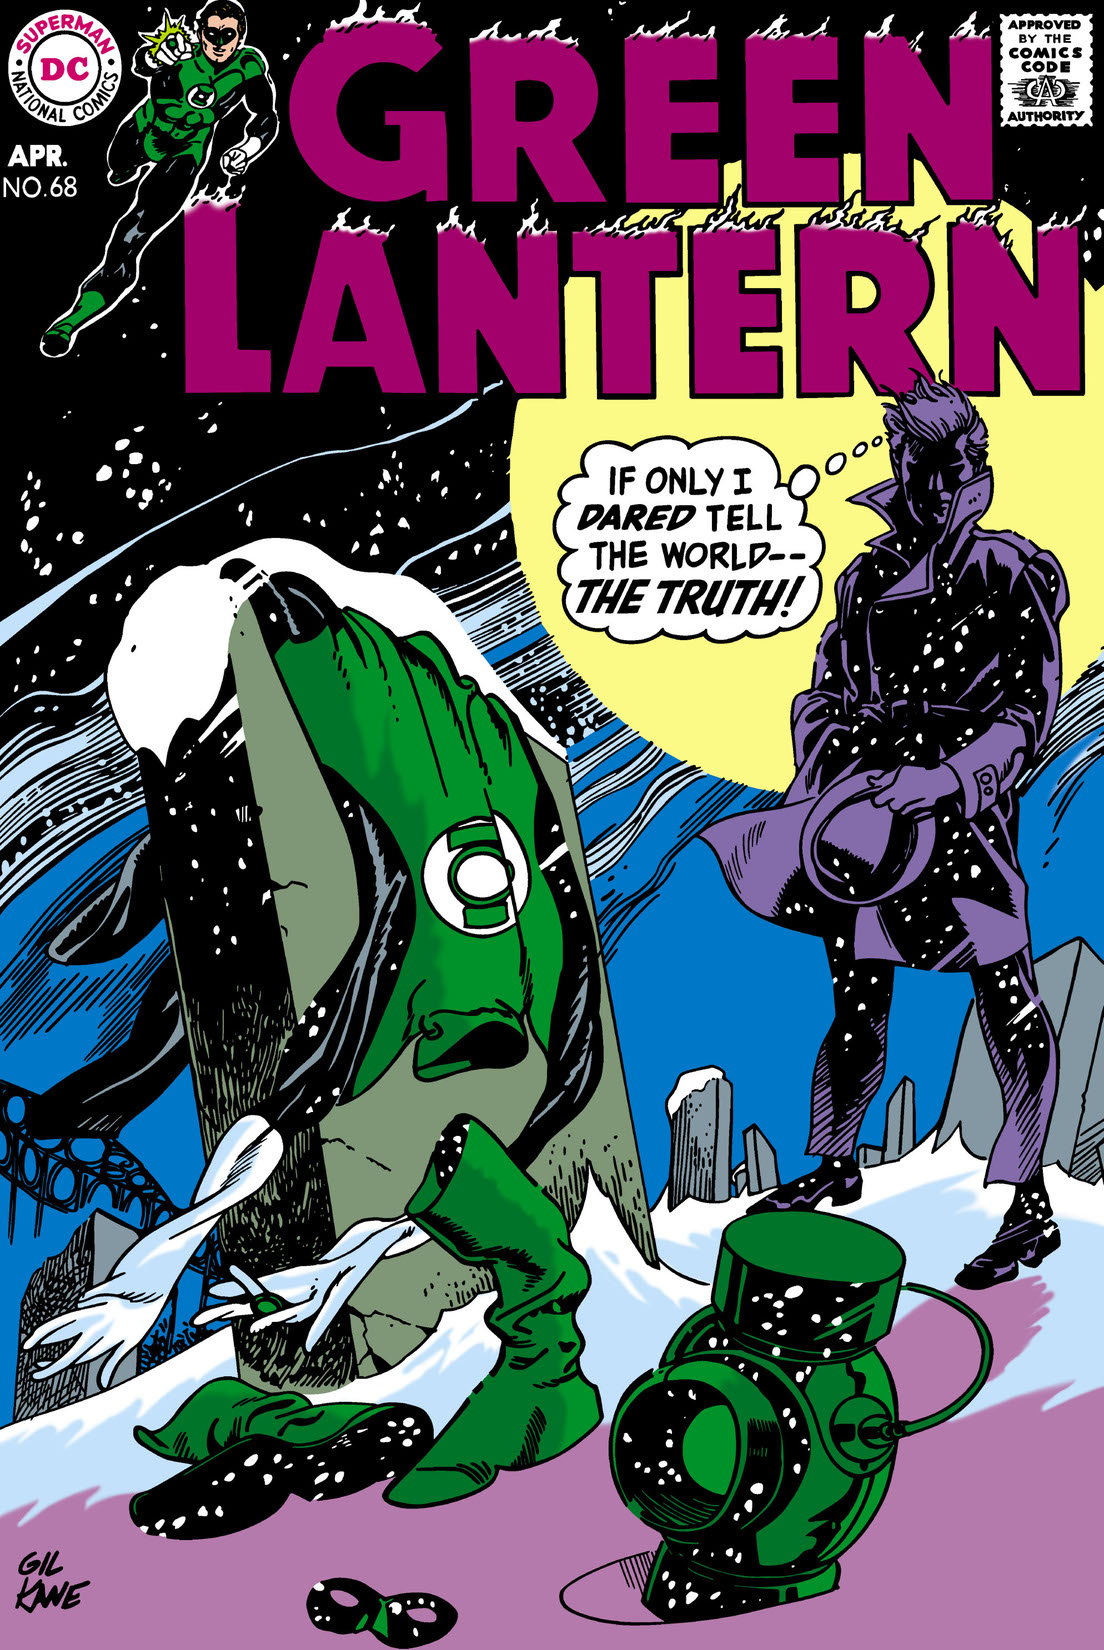 Green Lantern (1960-) #68 preview images